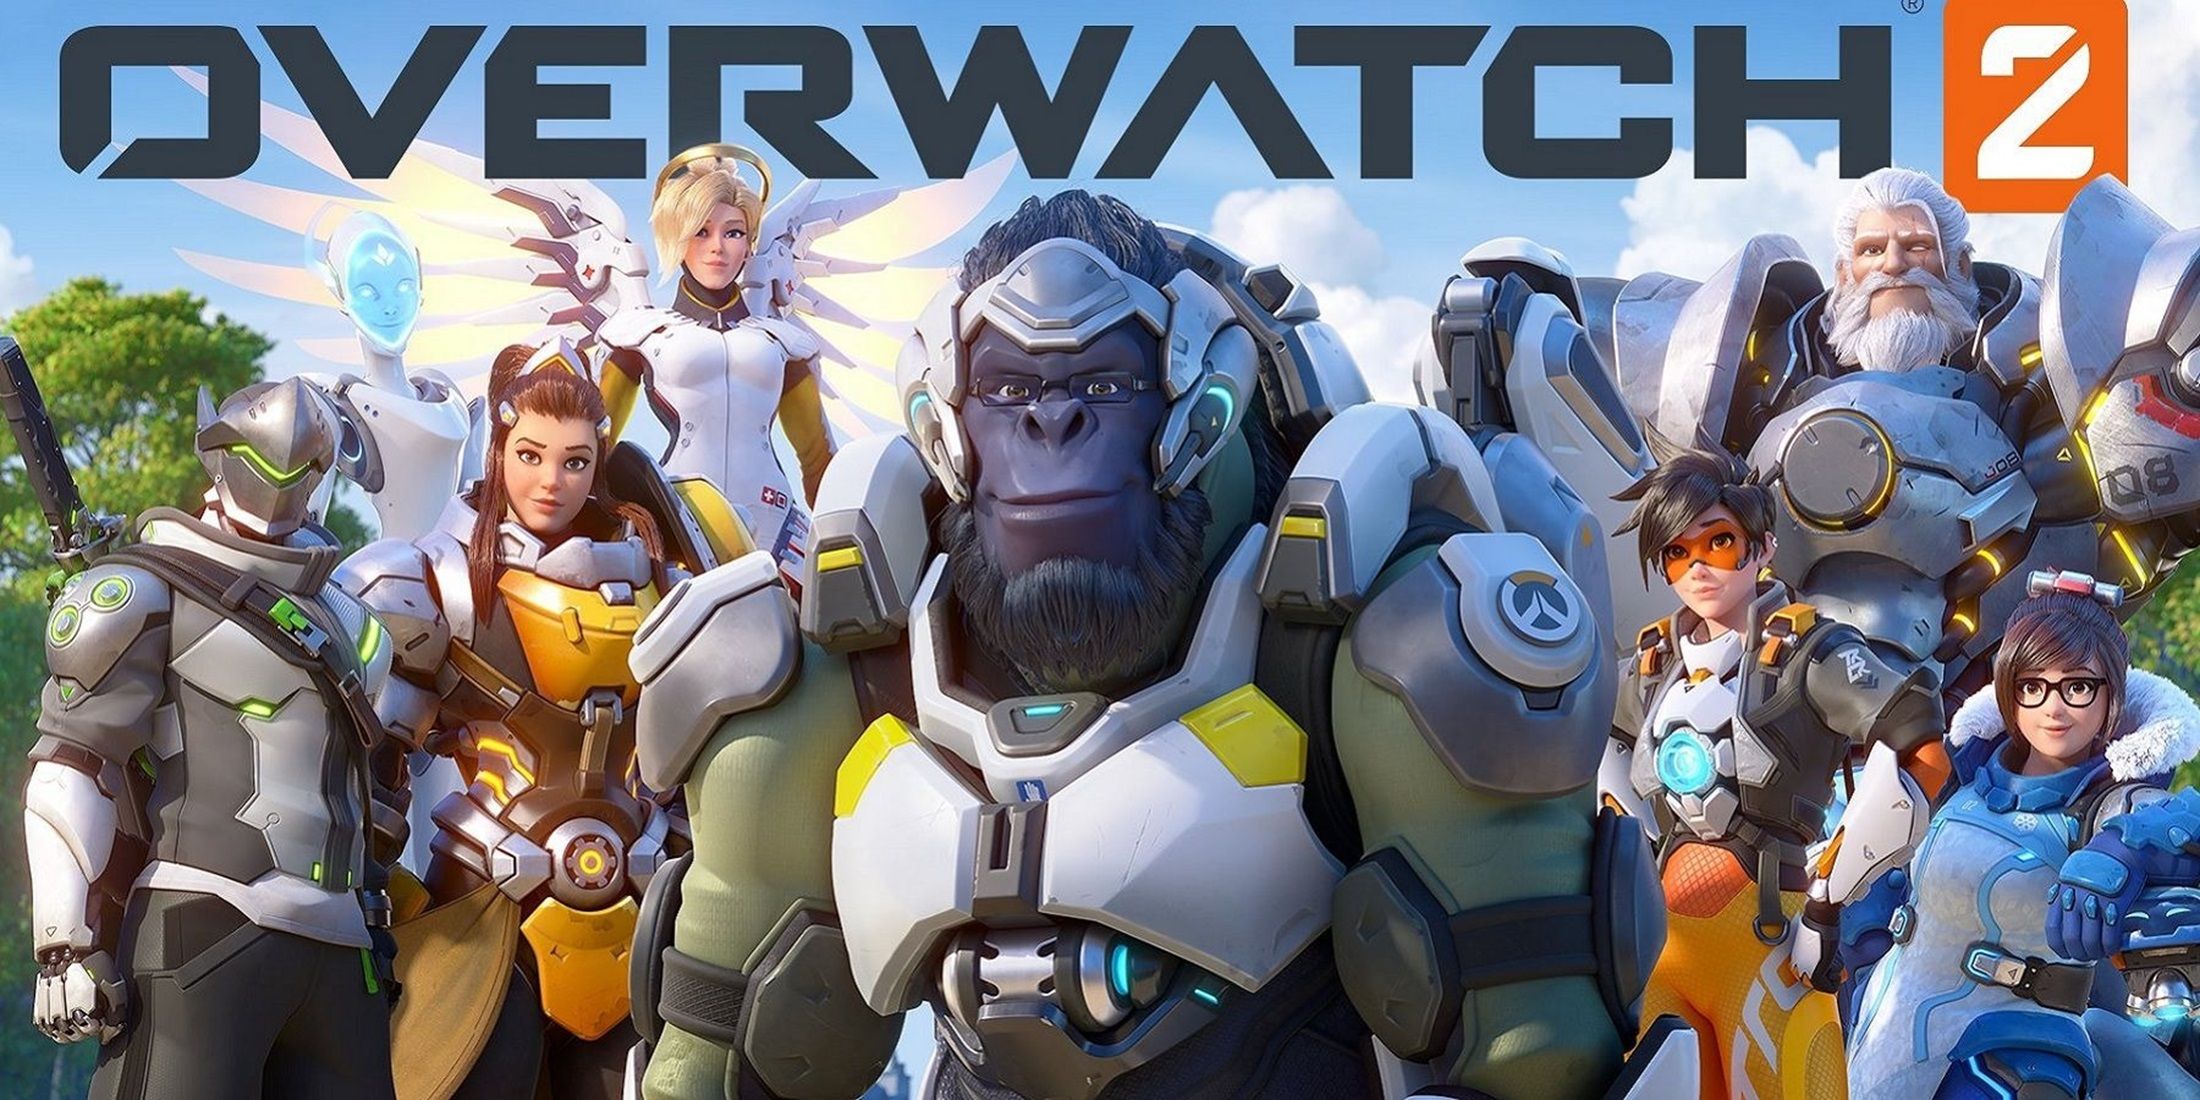 Overwatch 2 prime gaming removed